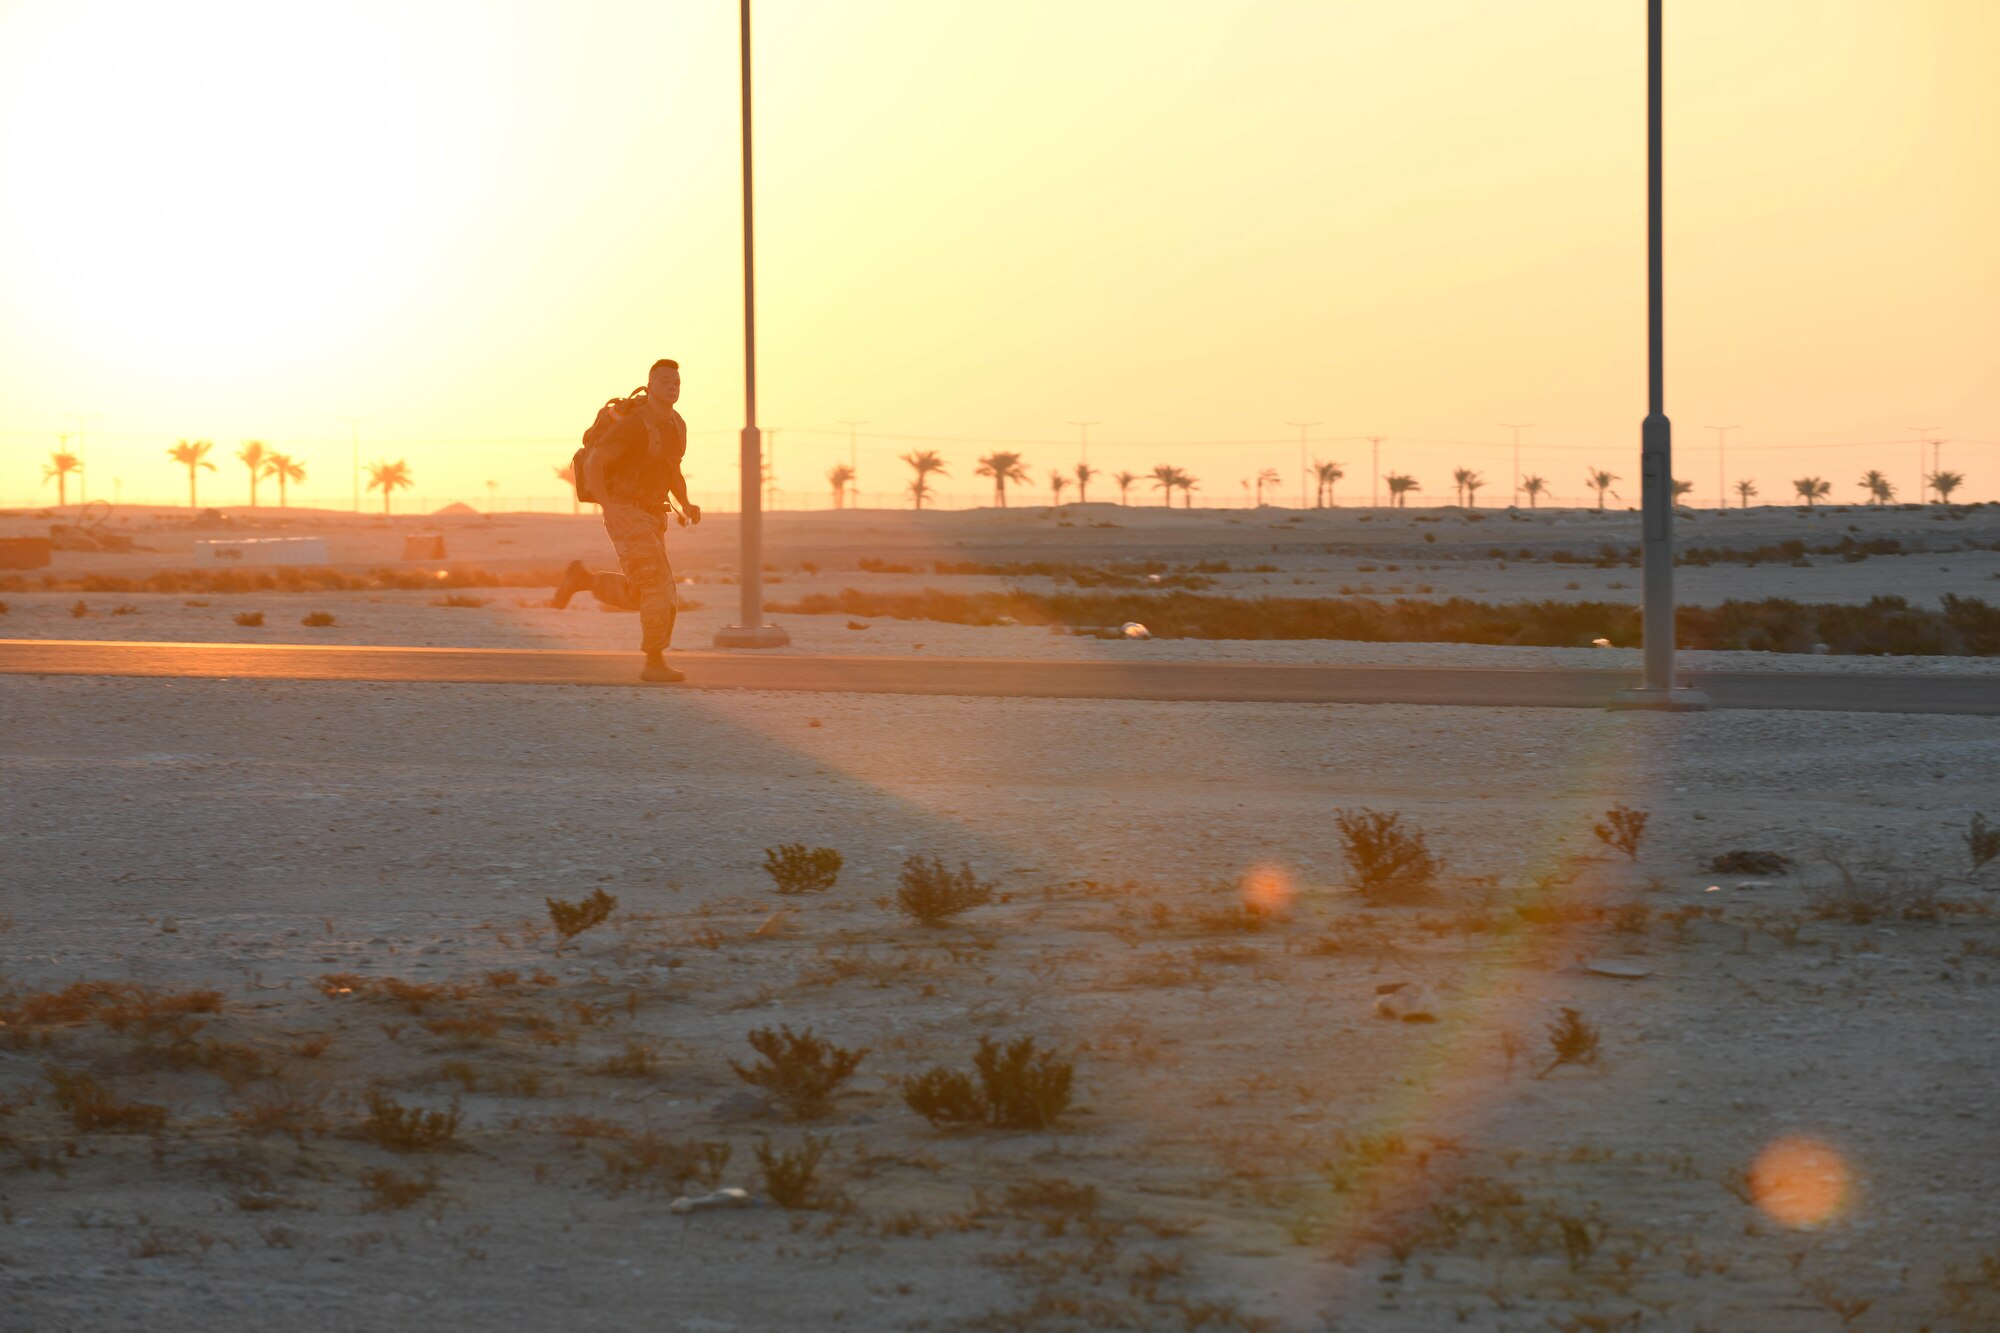 U.S. Army Private 1st Class Isaac Vieau, an ammunition supply specialist, 395th Ordnance Company, deployed to Al Udeid Air Base, Qatar, rucks through sunrise Dec. 5, 2020, while participating in the traditional 30-kilometer (18.6-mile) Norwegian foot march event. The tradition began in 1915, 10 years after Norway gained its independence from Sweden and has become a rite of passage for all Norwegian military members. Vieau was one of nearly 120 coalition members, including Americans, Australians, New Zealanders, British and Canadians who participated in the march under the supervision of Norwegian armed forces Capt. Magne Rambo, deployed to Al Udeid AB as part of the U.S. Central Command Partner Integration Enterprise. (U.S. Air Force photo by Staff Sgt. Kayla White)